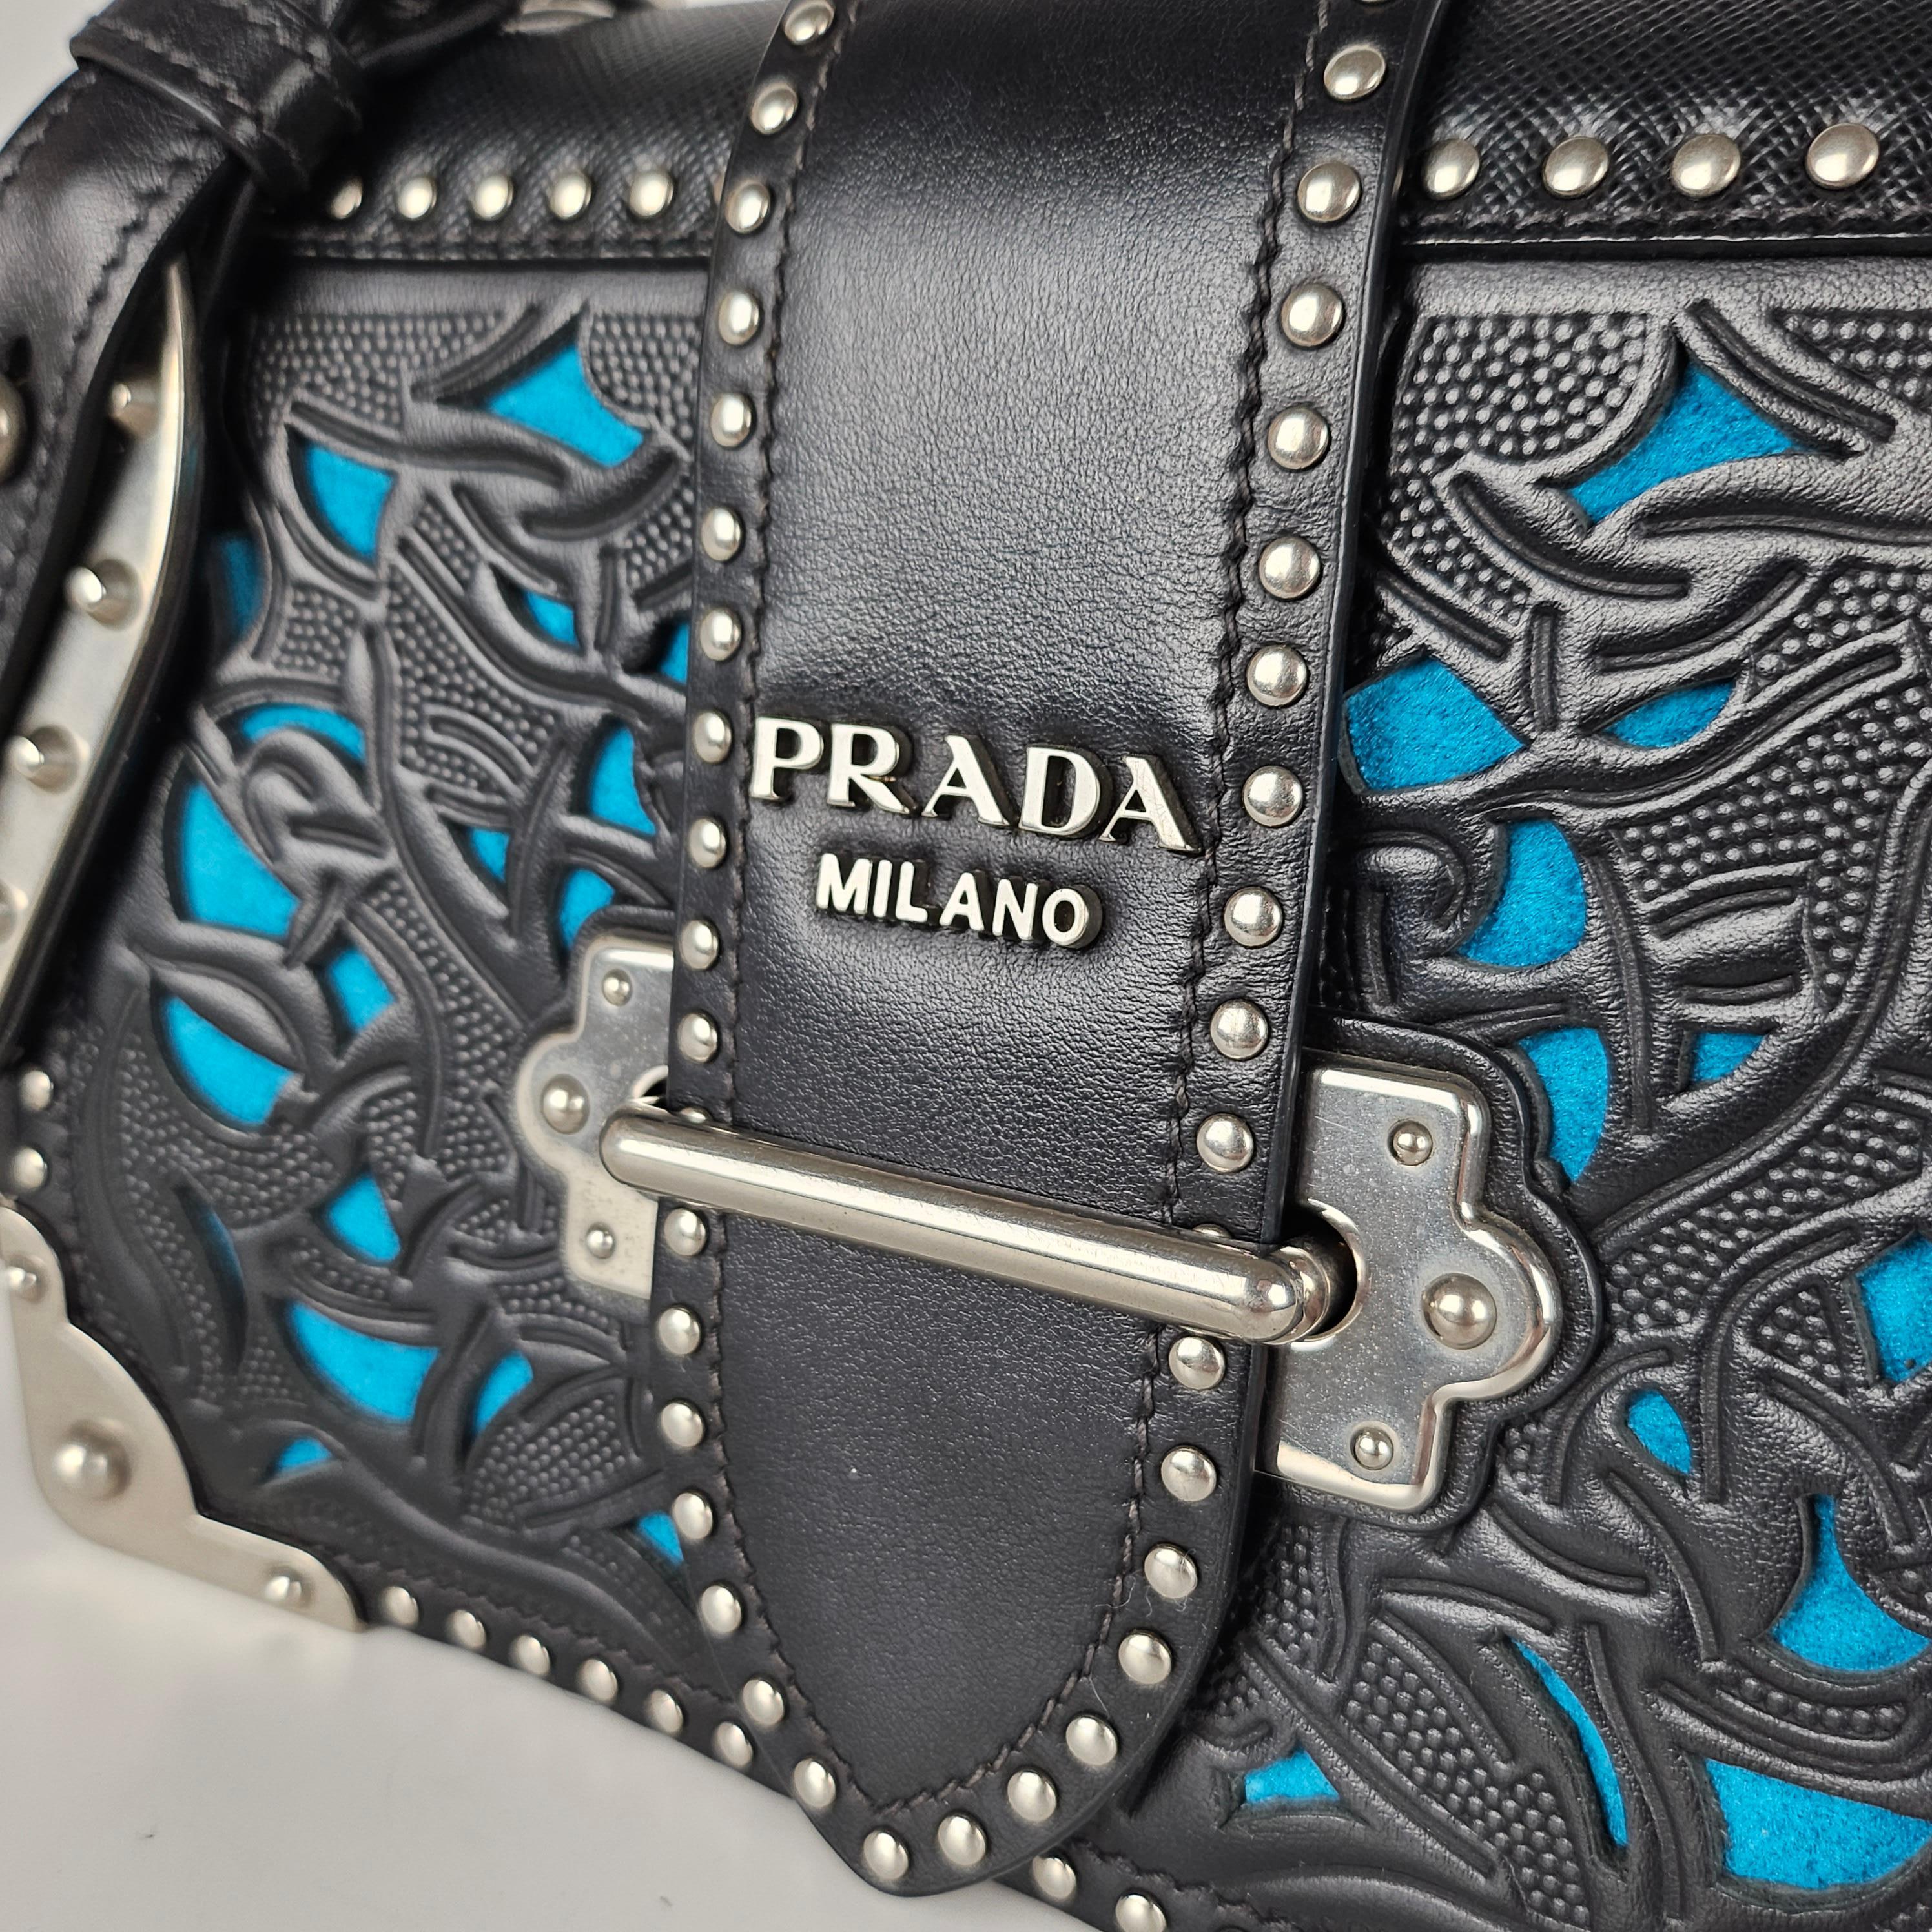 Condition: This authentic Prada bag is in great pre-loved condition. There is minor tarnishing and scratches on hardware and light scratches in the interior.

No accessories included (dust bag, box, etc.)

Features: Adjustable leather strap, laser